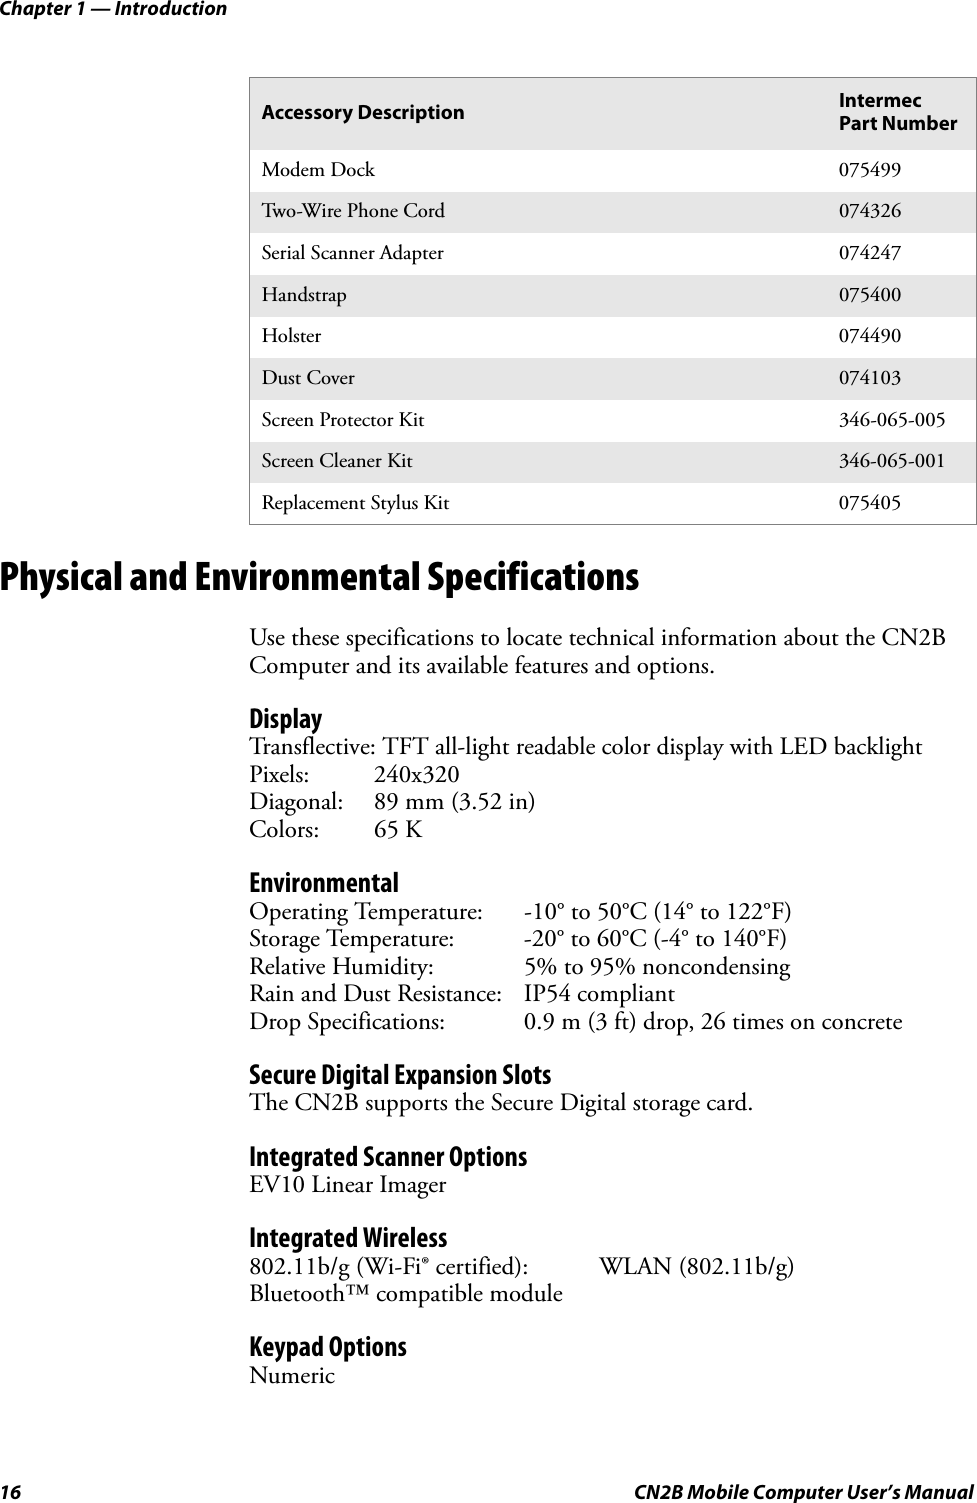 Chapter 1 — Introduction16 CN2B Mobile Computer User’s ManualPhysical and Environmental SpecificationsUse these specifications to locate technical information about the CN2B Computer and its available features and options.DisplayTransflective: TFT all-light readable color display with LED backlightPixels: 240x320Diagonal: 89 mm (3.52 in)Colors: 65 KEnvironmentalOperating Temperature: -10° to 50°C (14° to 122°F)Storage Temperature: -20° to 60°C (-4° to 140°F)Relative Humidity: 5% to 95% noncondensingRain and Dust Resistance: IP54 compliantDrop Specifications: 0.9 m (3 ft) drop, 26 times on concreteSecure Digital Expansion SlotsThe CN2B supports the Secure Digital storage card.Integrated Scanner OptionsEV10 Linear ImagerIntegrated Wireless802.11b/g (Wi-Fi® certified): WLAN (802.11b/g)Bluetooth™ compatible moduleKeypad OptionsNumericModem Dock 075499Two-Wire Phone Cord 074326Serial Scanner Adapter 074247Handstrap 075400Holster 074490Dust Cover 074103Screen Protector Kit 346-065-005Screen Cleaner Kit 346-065-001Replacement Stylus Kit 075405Accessory Description Intermec Part Number